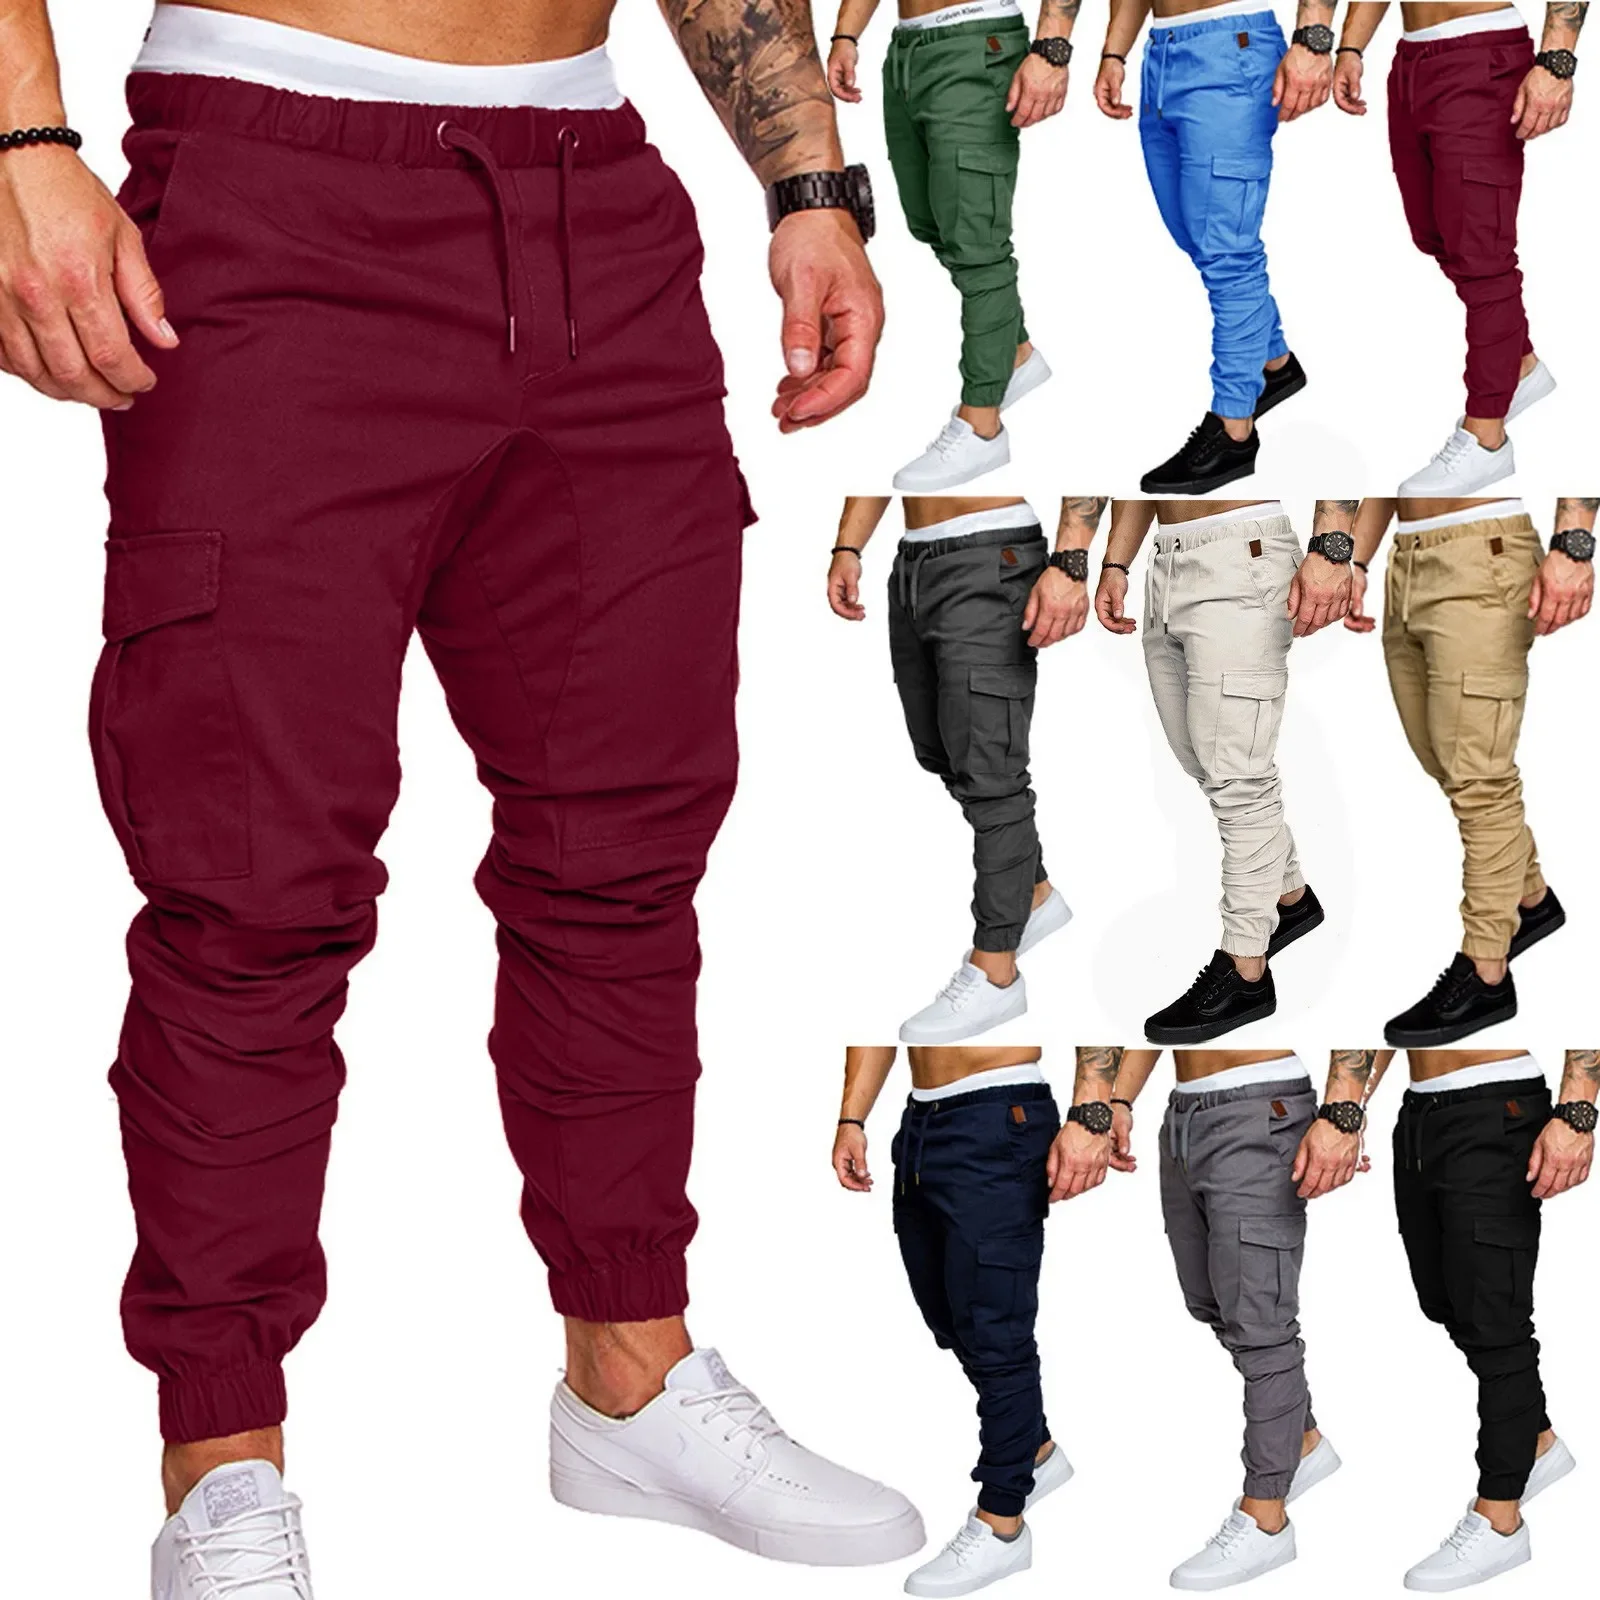 

Fashion Men's Skinny Jeans Trousers Solid Color Male Slim Fit Frayed Denim Pants Drawstring Washed Overalls Trousers